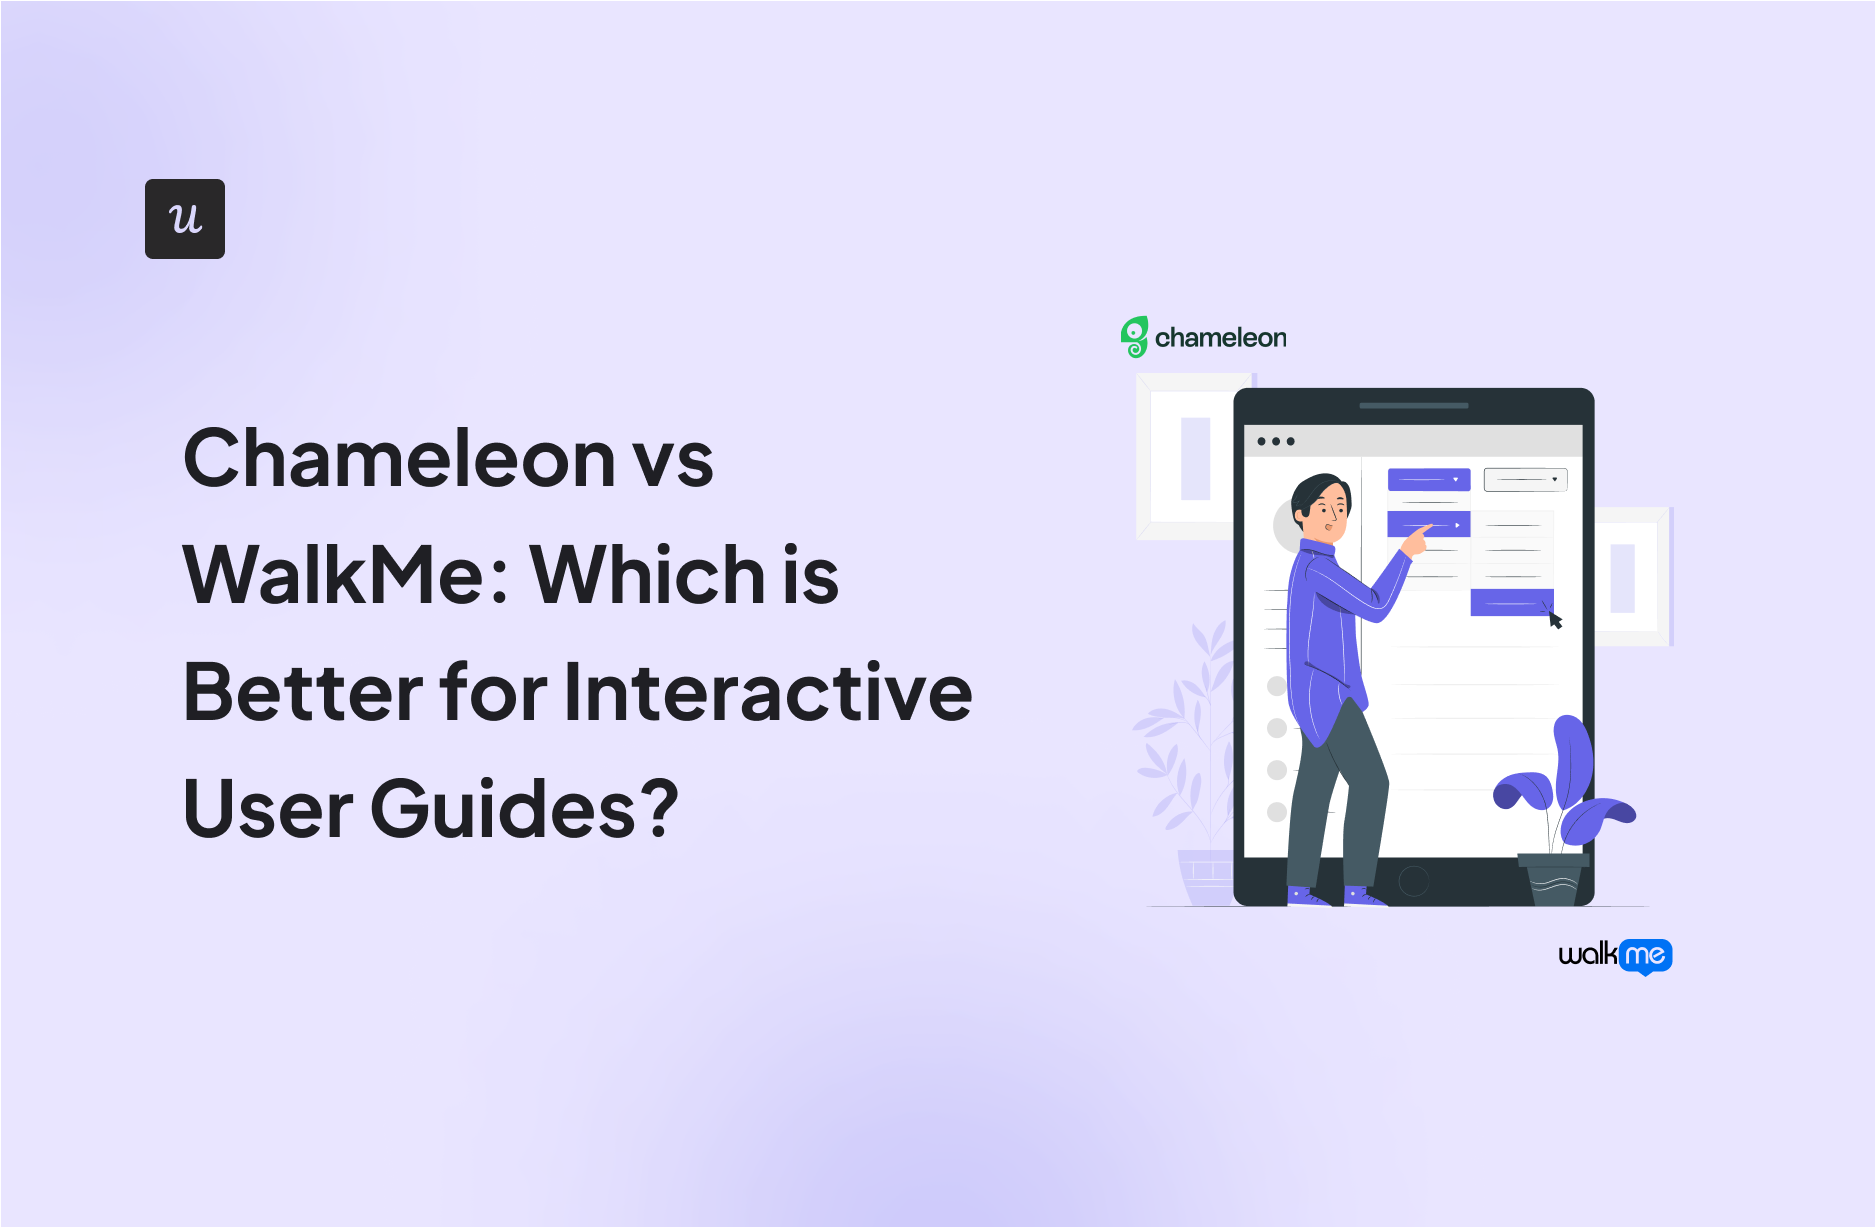 Chameleon vs Walkme: Which is Better for Interactive User Guides?